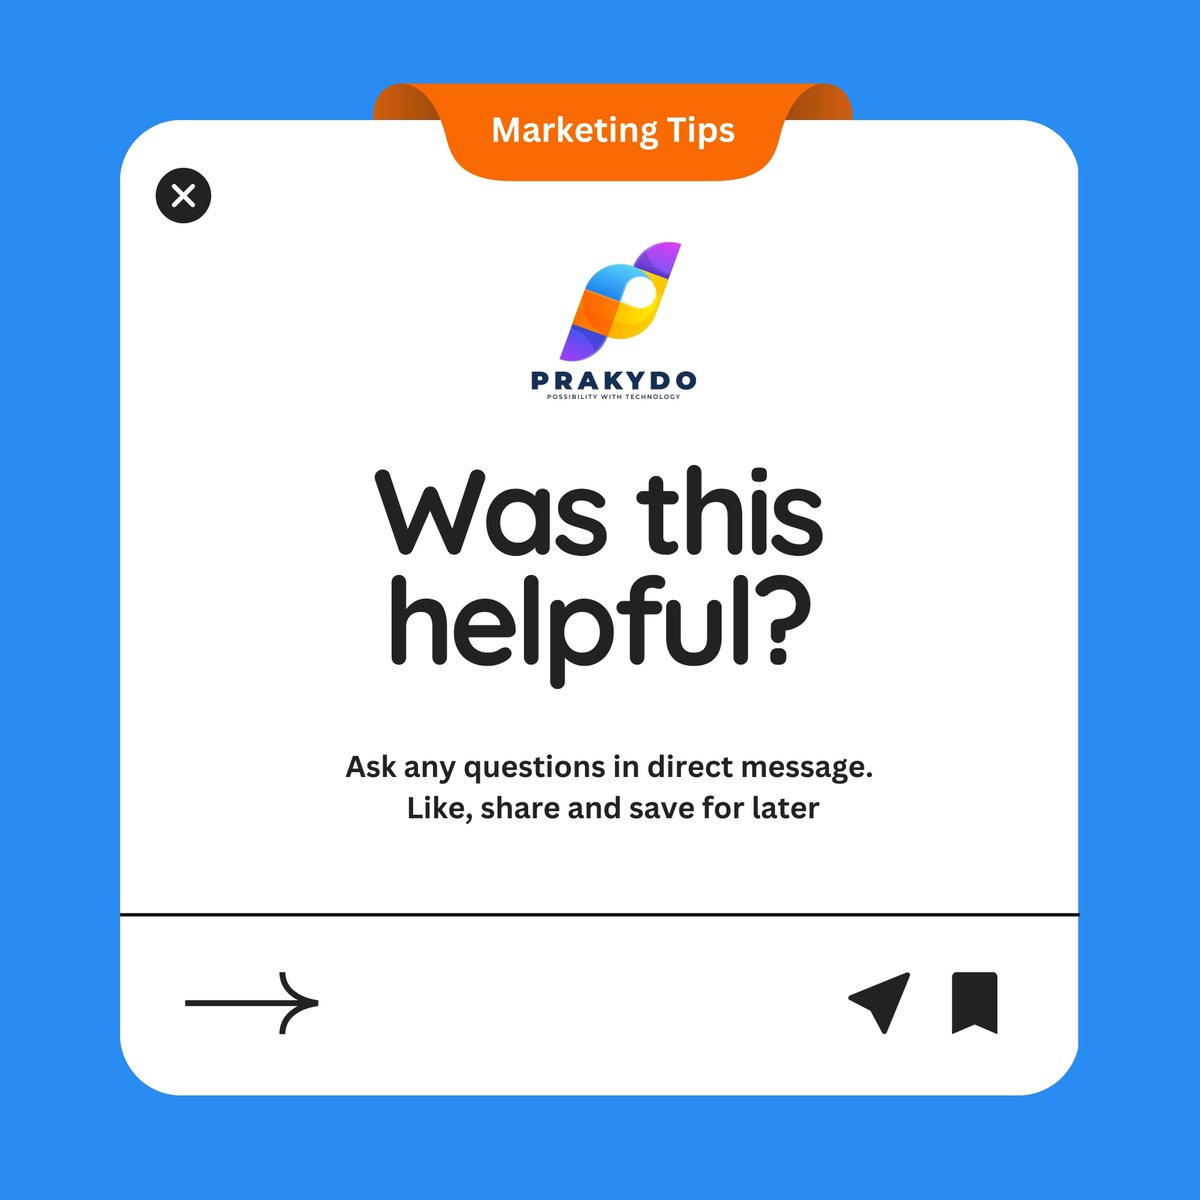 Ask any question in DM or in the comment section for any query. Share us your opinion! Like, share and save this post for later! #marketingdigital #marketingtesting #digitalmarketing #digital #digitalartist #digitalmarketingstrategy #marketingtips #digitalnetworkmarketing